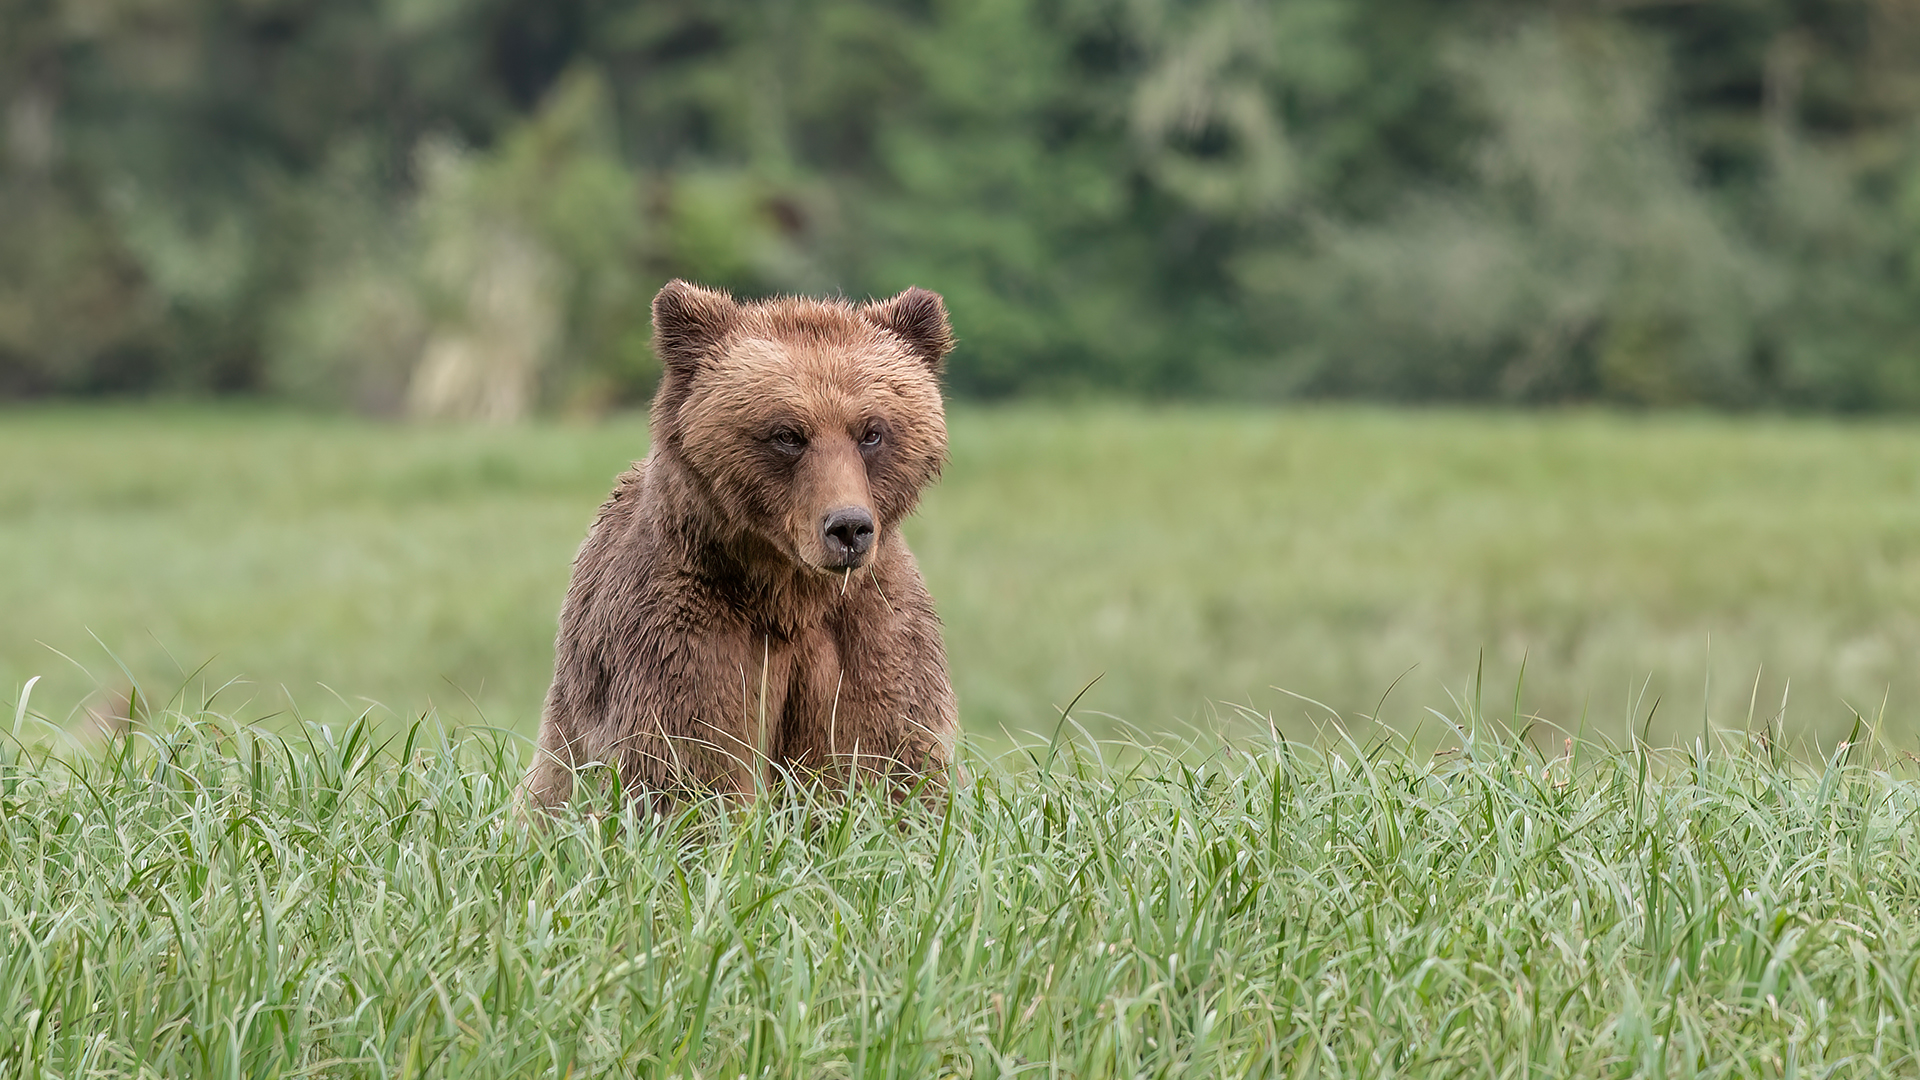 This young adult male, with ears set quite far apart, exemplifies the dish-shaped forehead. Male bears reach their peak size around 12-17 years old. Judging by the size of this bear’s snout, he’ll likely grow quite a bit more.